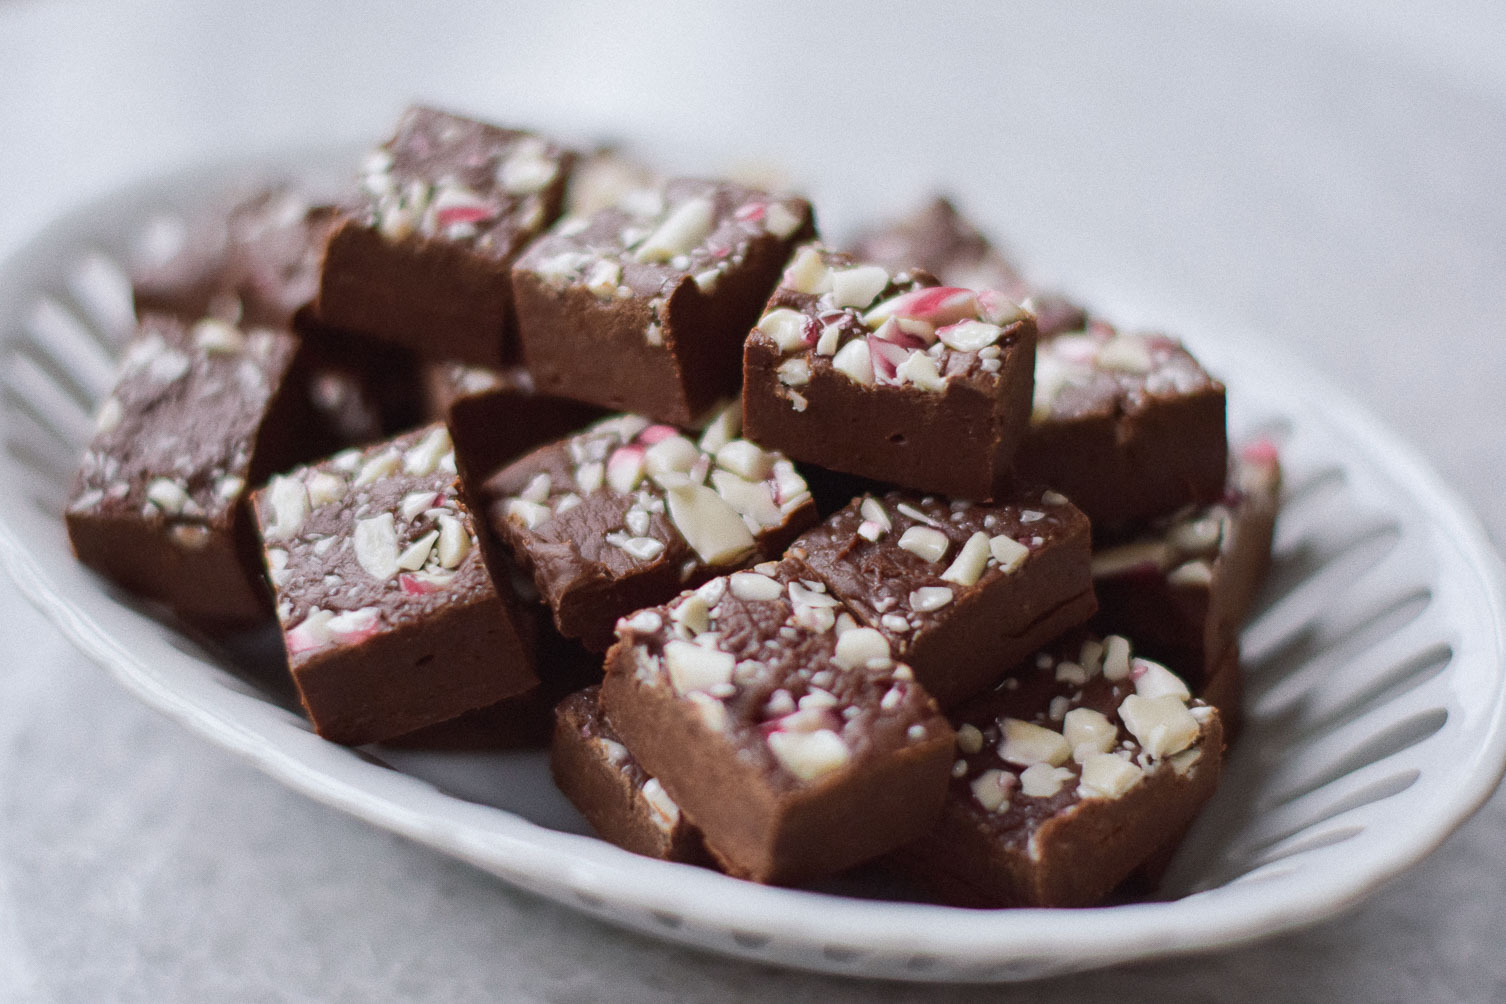 sharing this holiday recipe for easy peppermint fudge squares